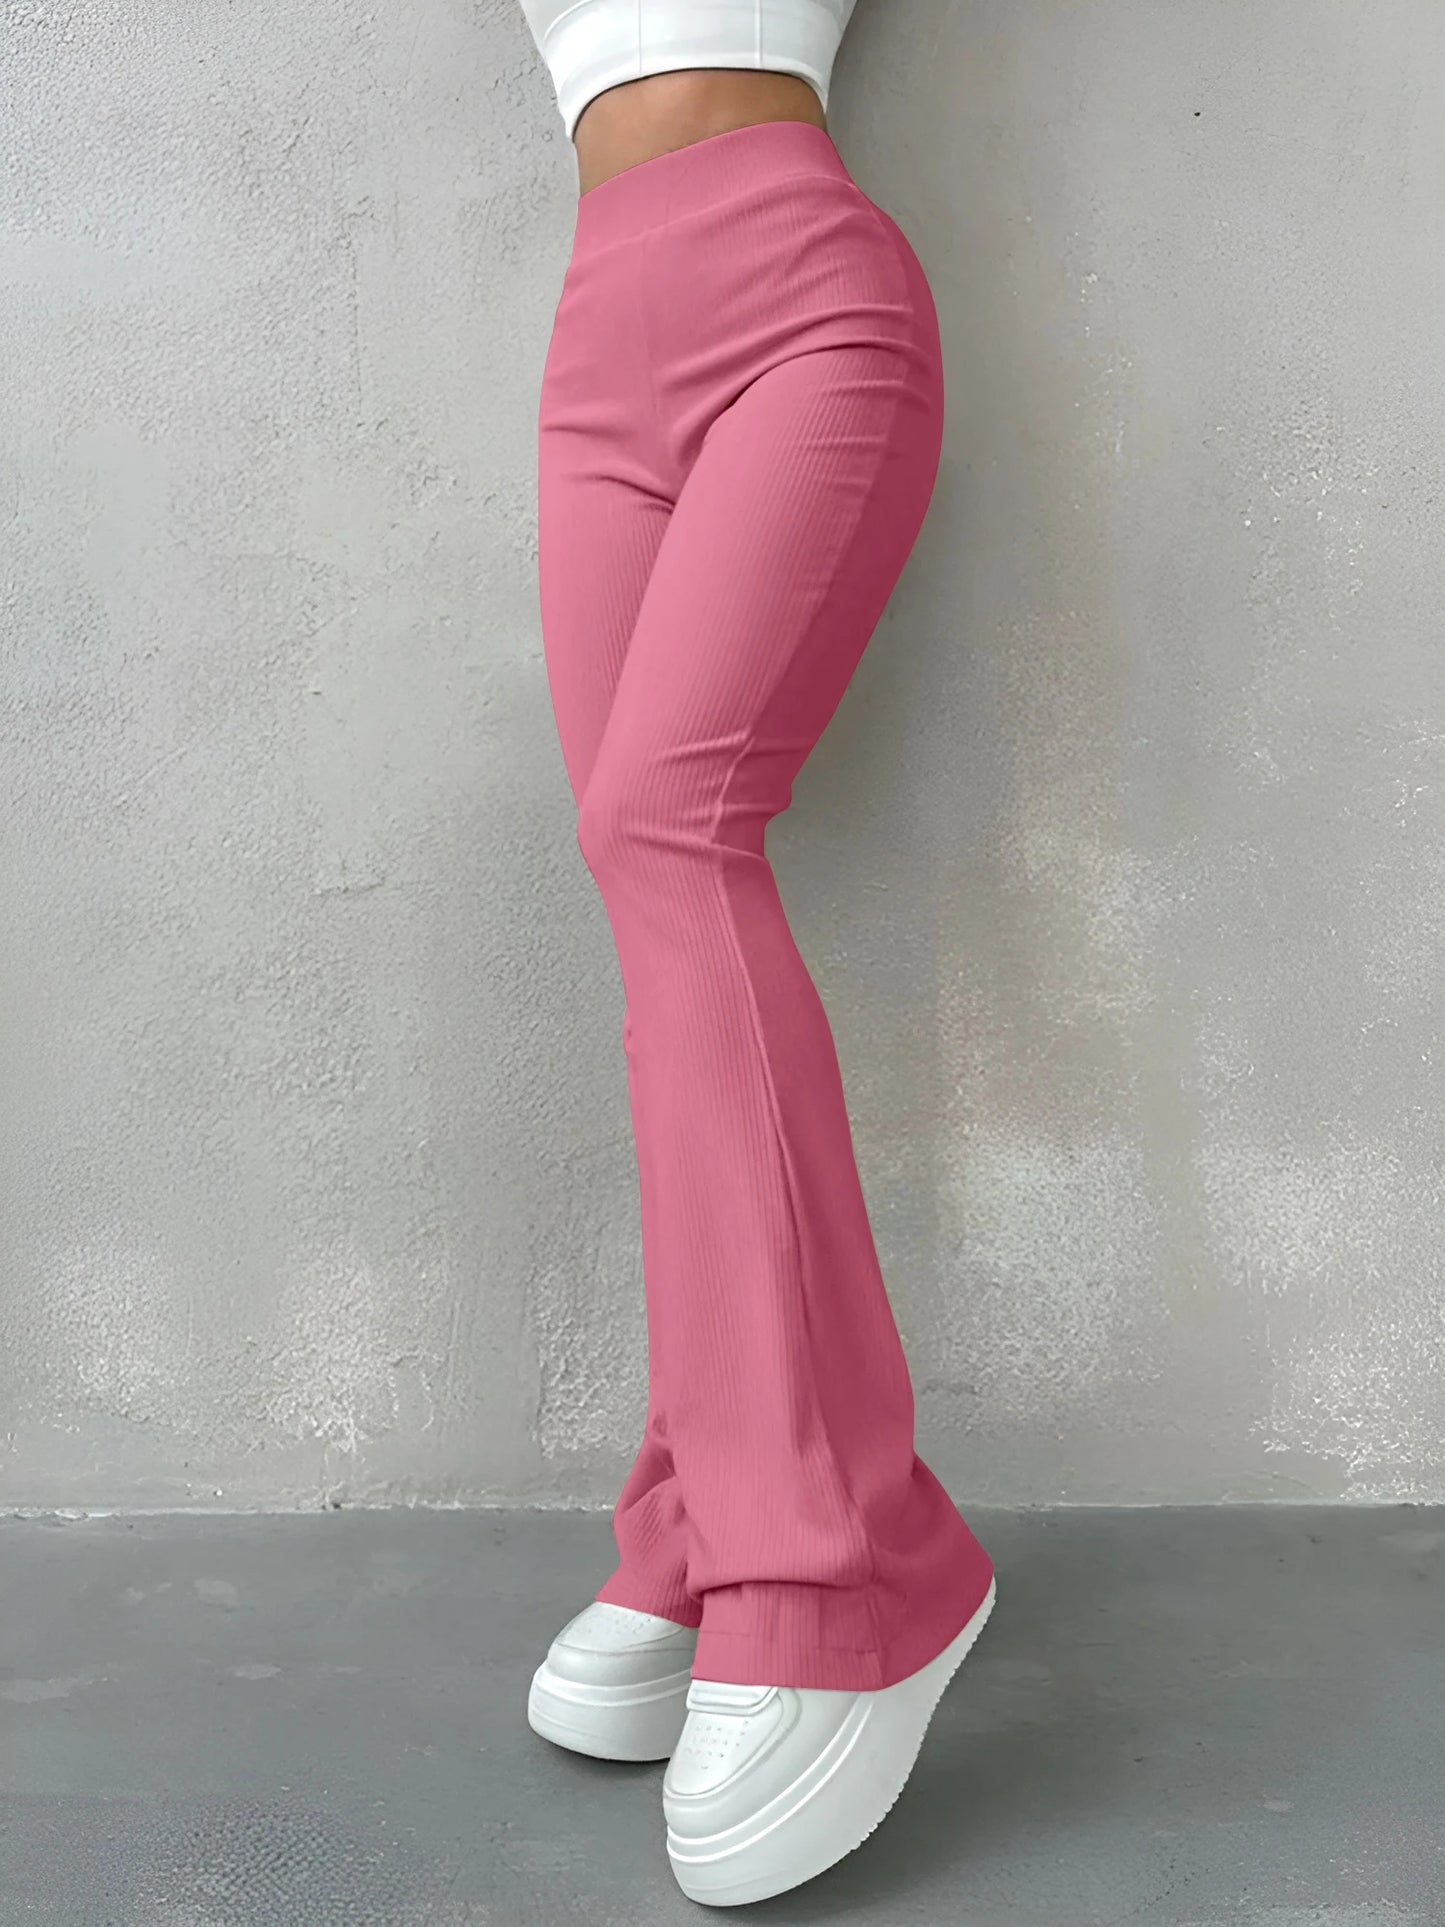 Sporty Pants- Women High-Waisted Flare Leggings for Casual to Dressy Looks- Rose Red- Chuzko Women Clothing